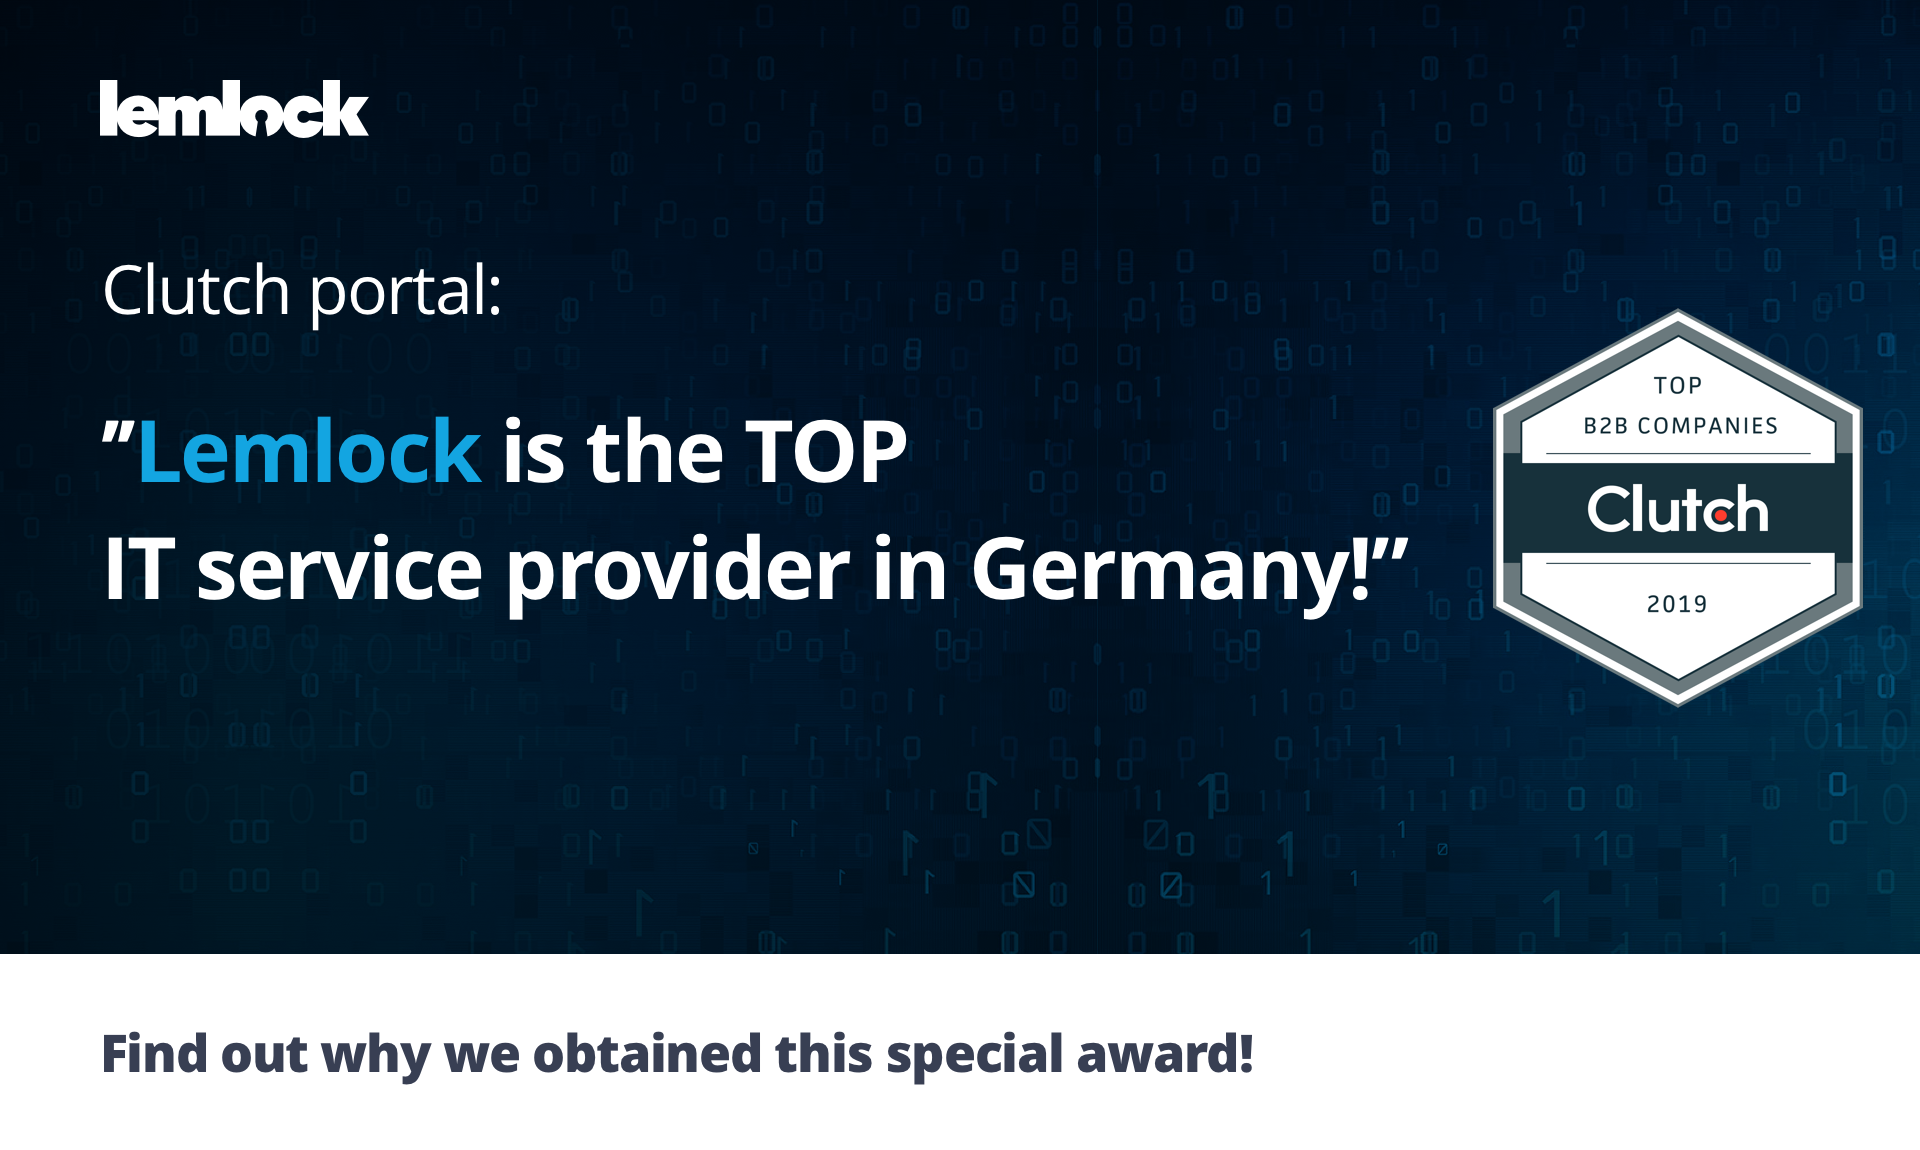 Lemlock Recognized as Top IT & Business in Germany by Clutch